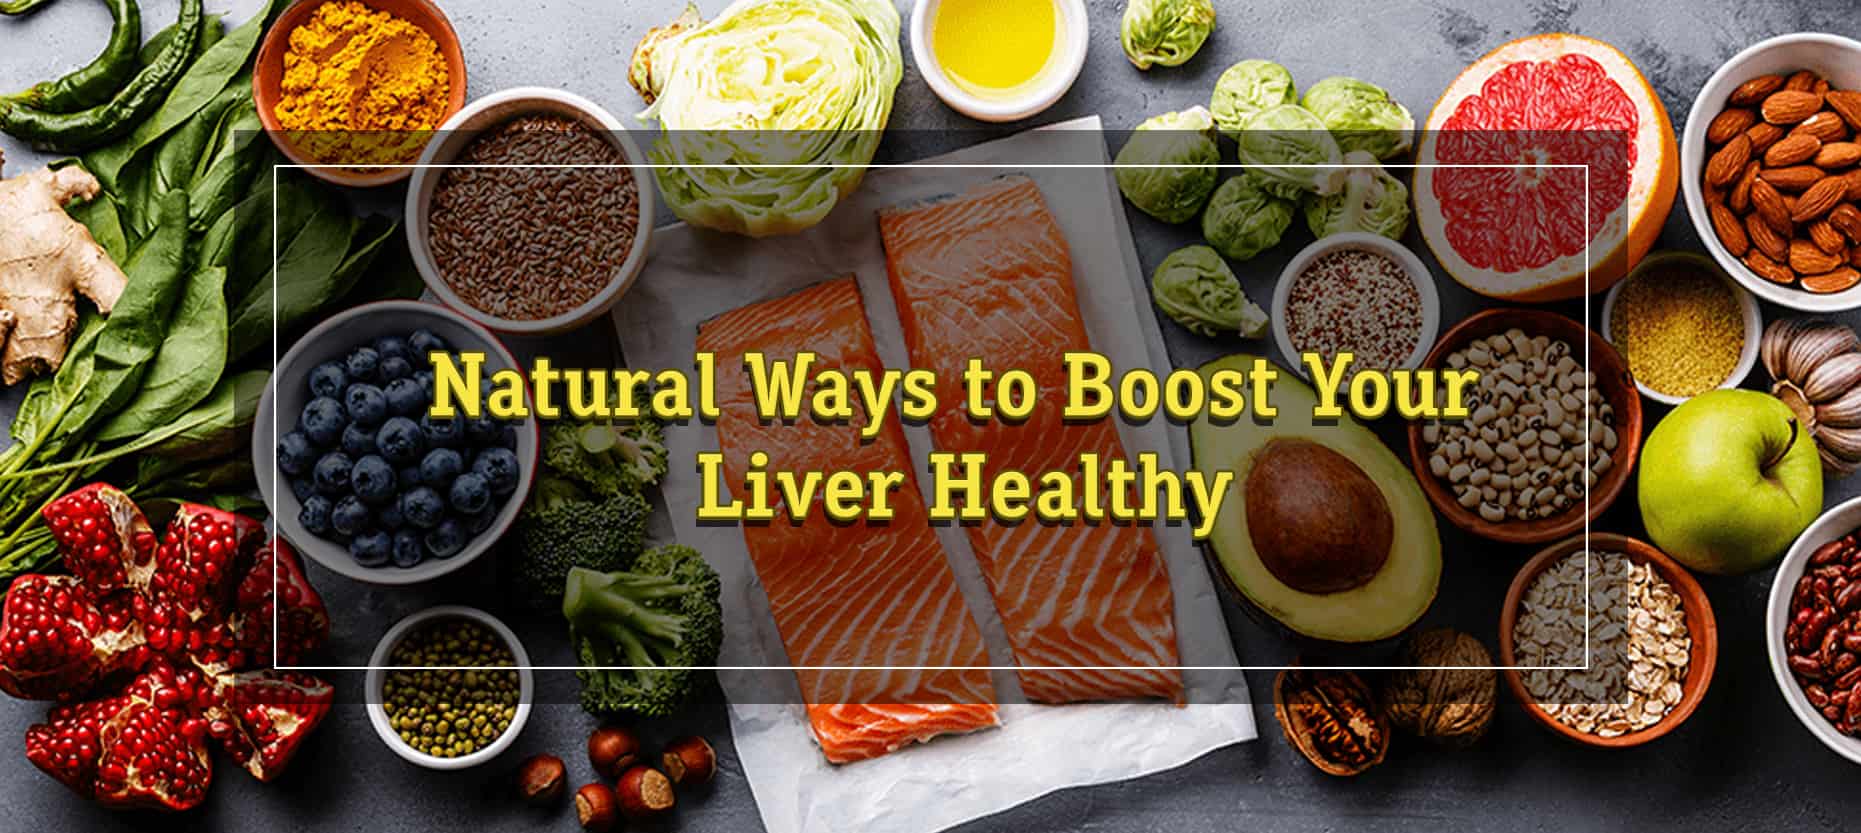 Natural Ways to Boost Your Liver Healthy